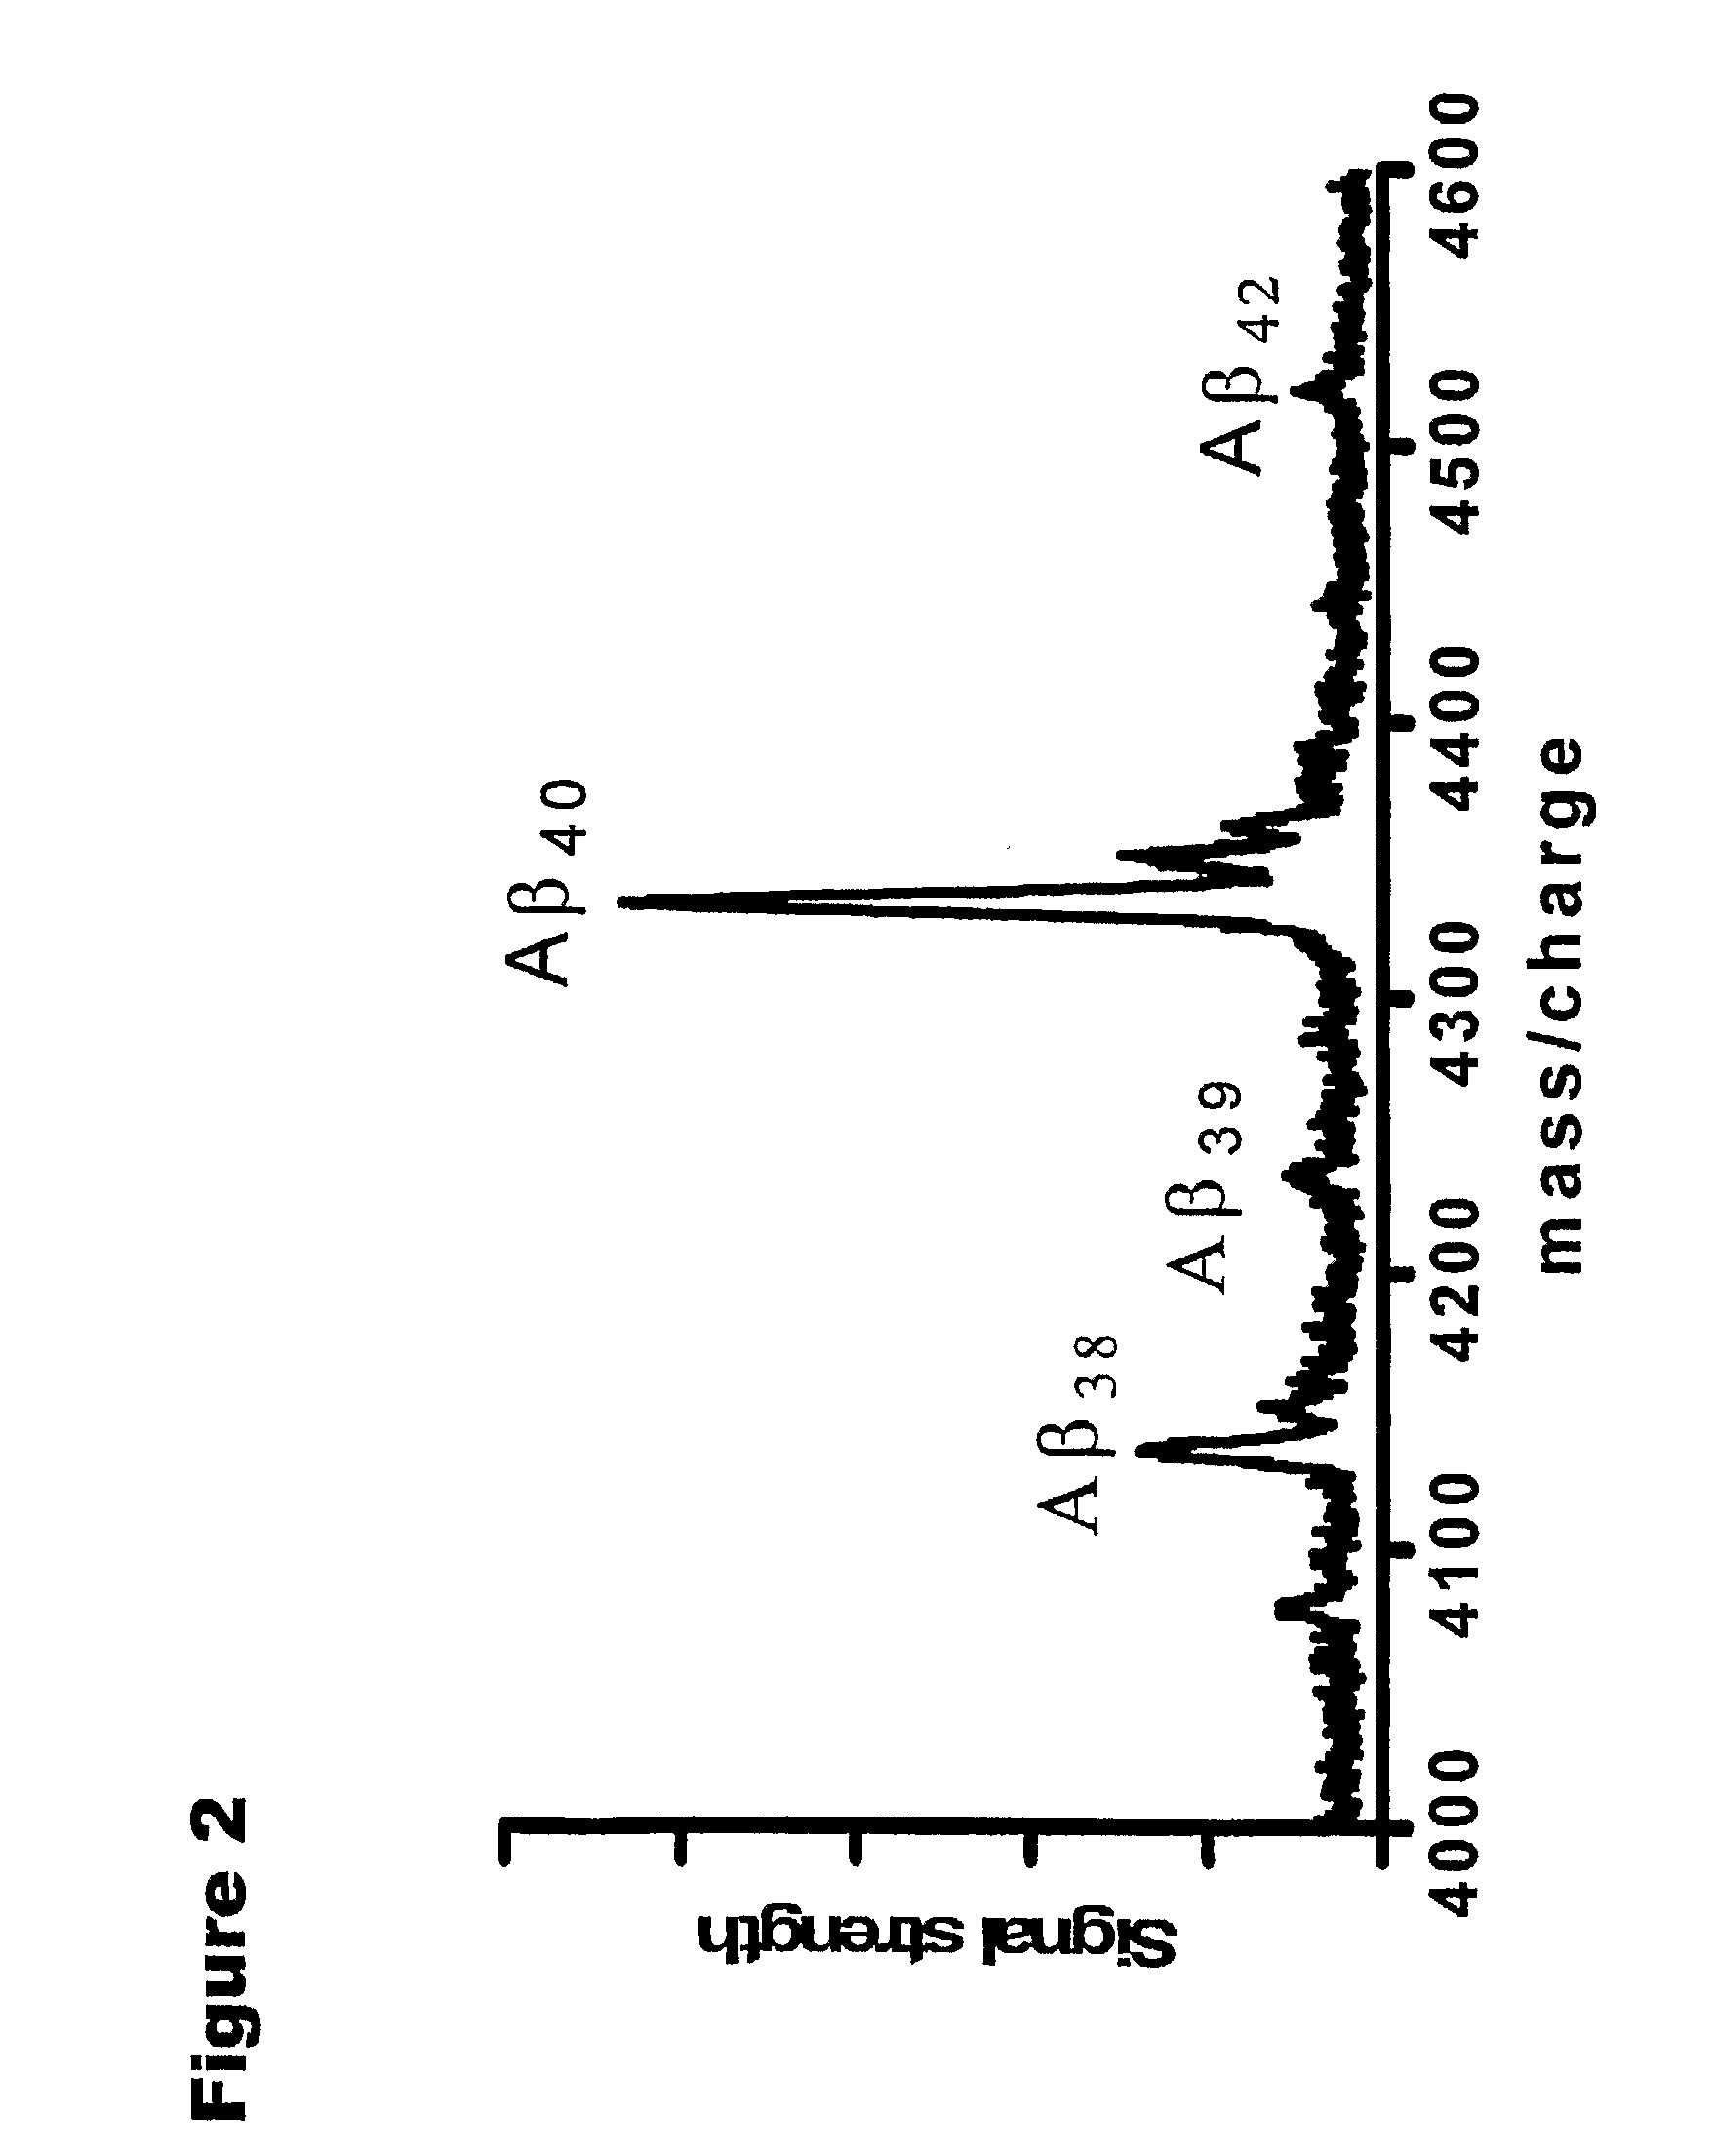 Methods for Measuring the Metabolism of Neurally Dervied Biomolecules in Vivo